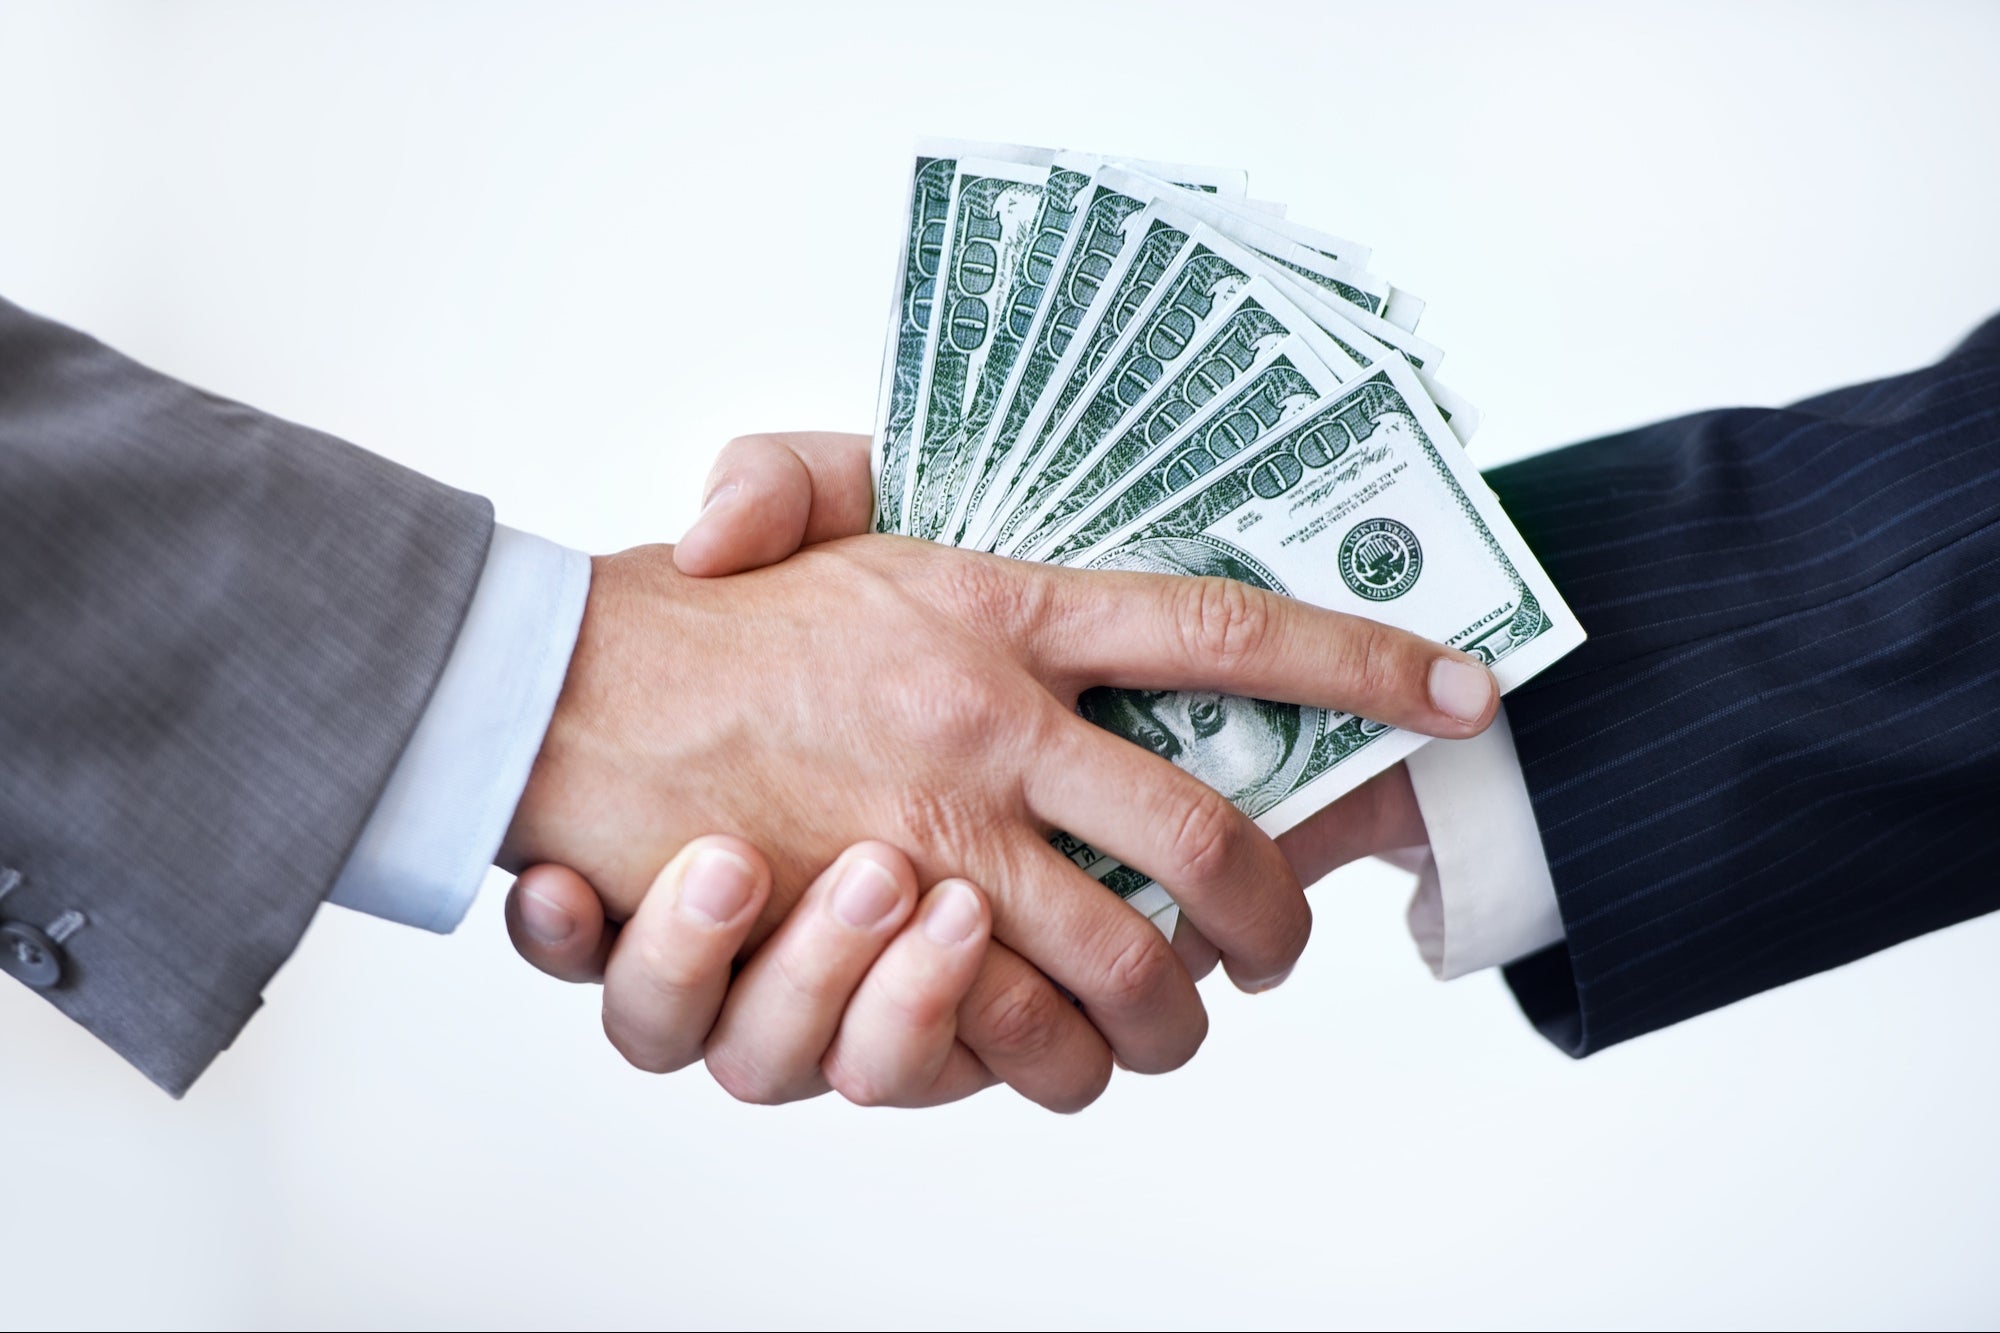 Two people shaking hands with money